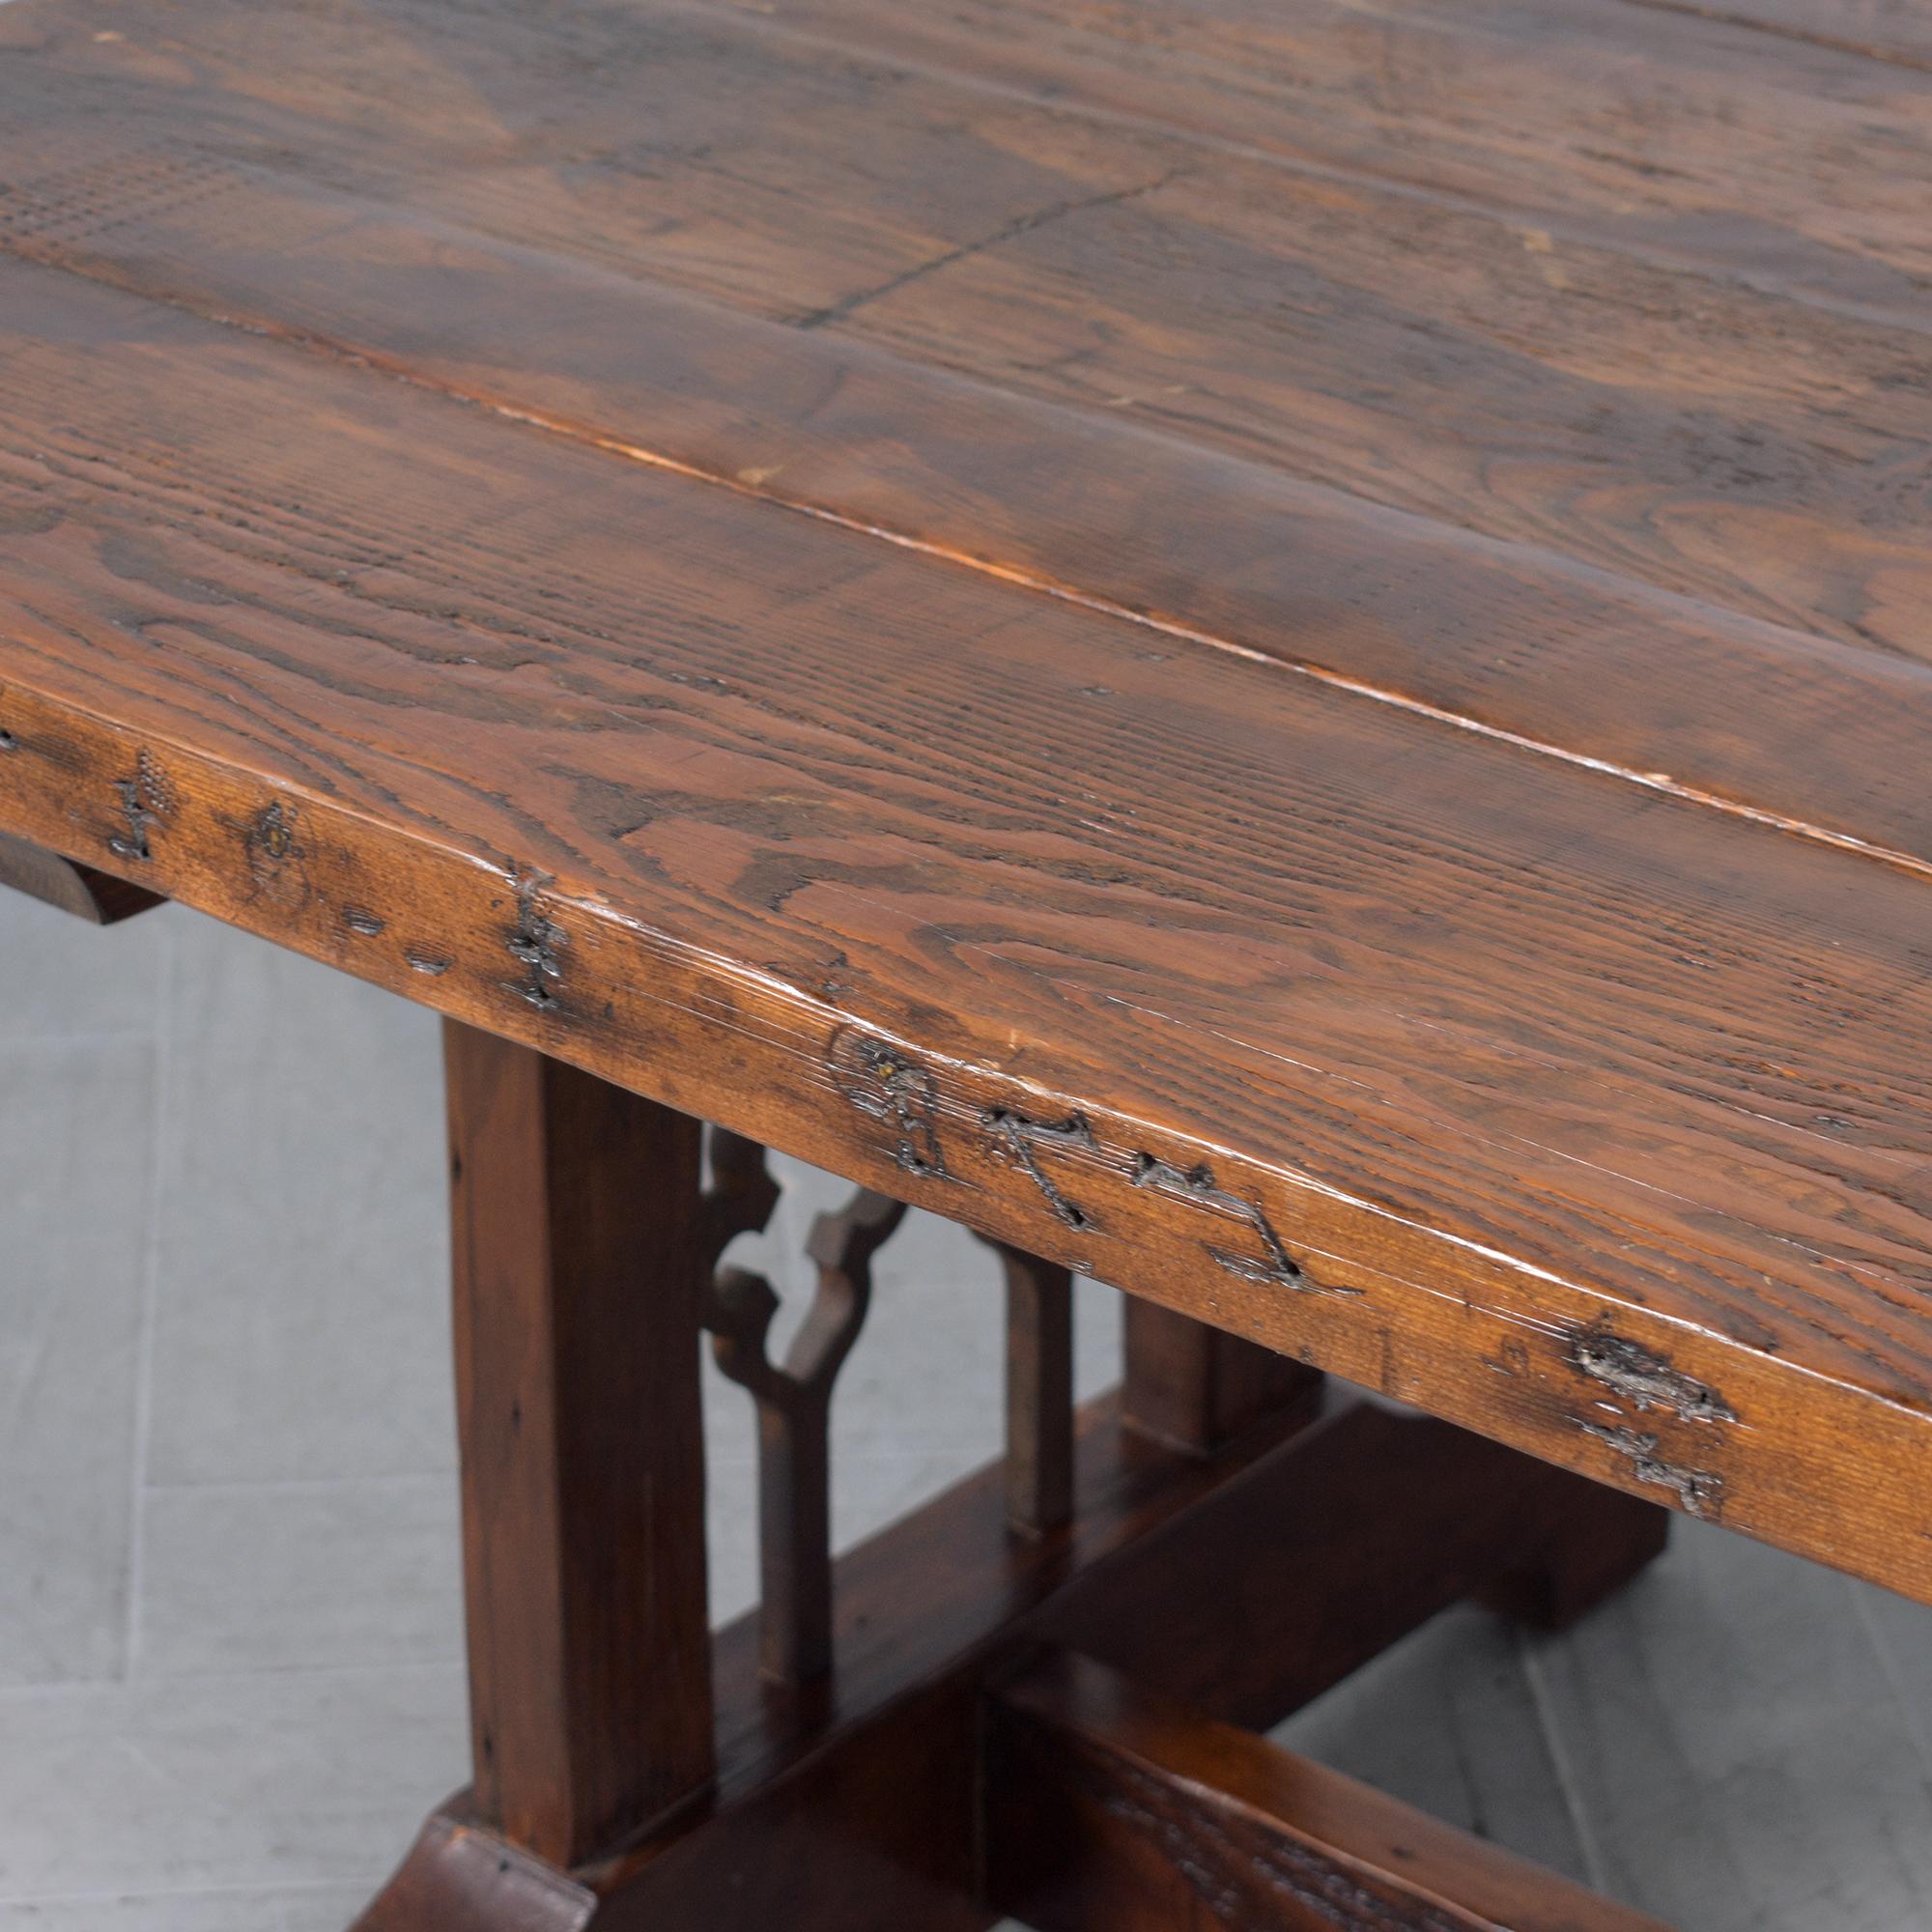 Spanish Colonial Vintage Solid Wood Dining Table with Iron Accents and Pedestal Legs For Sale